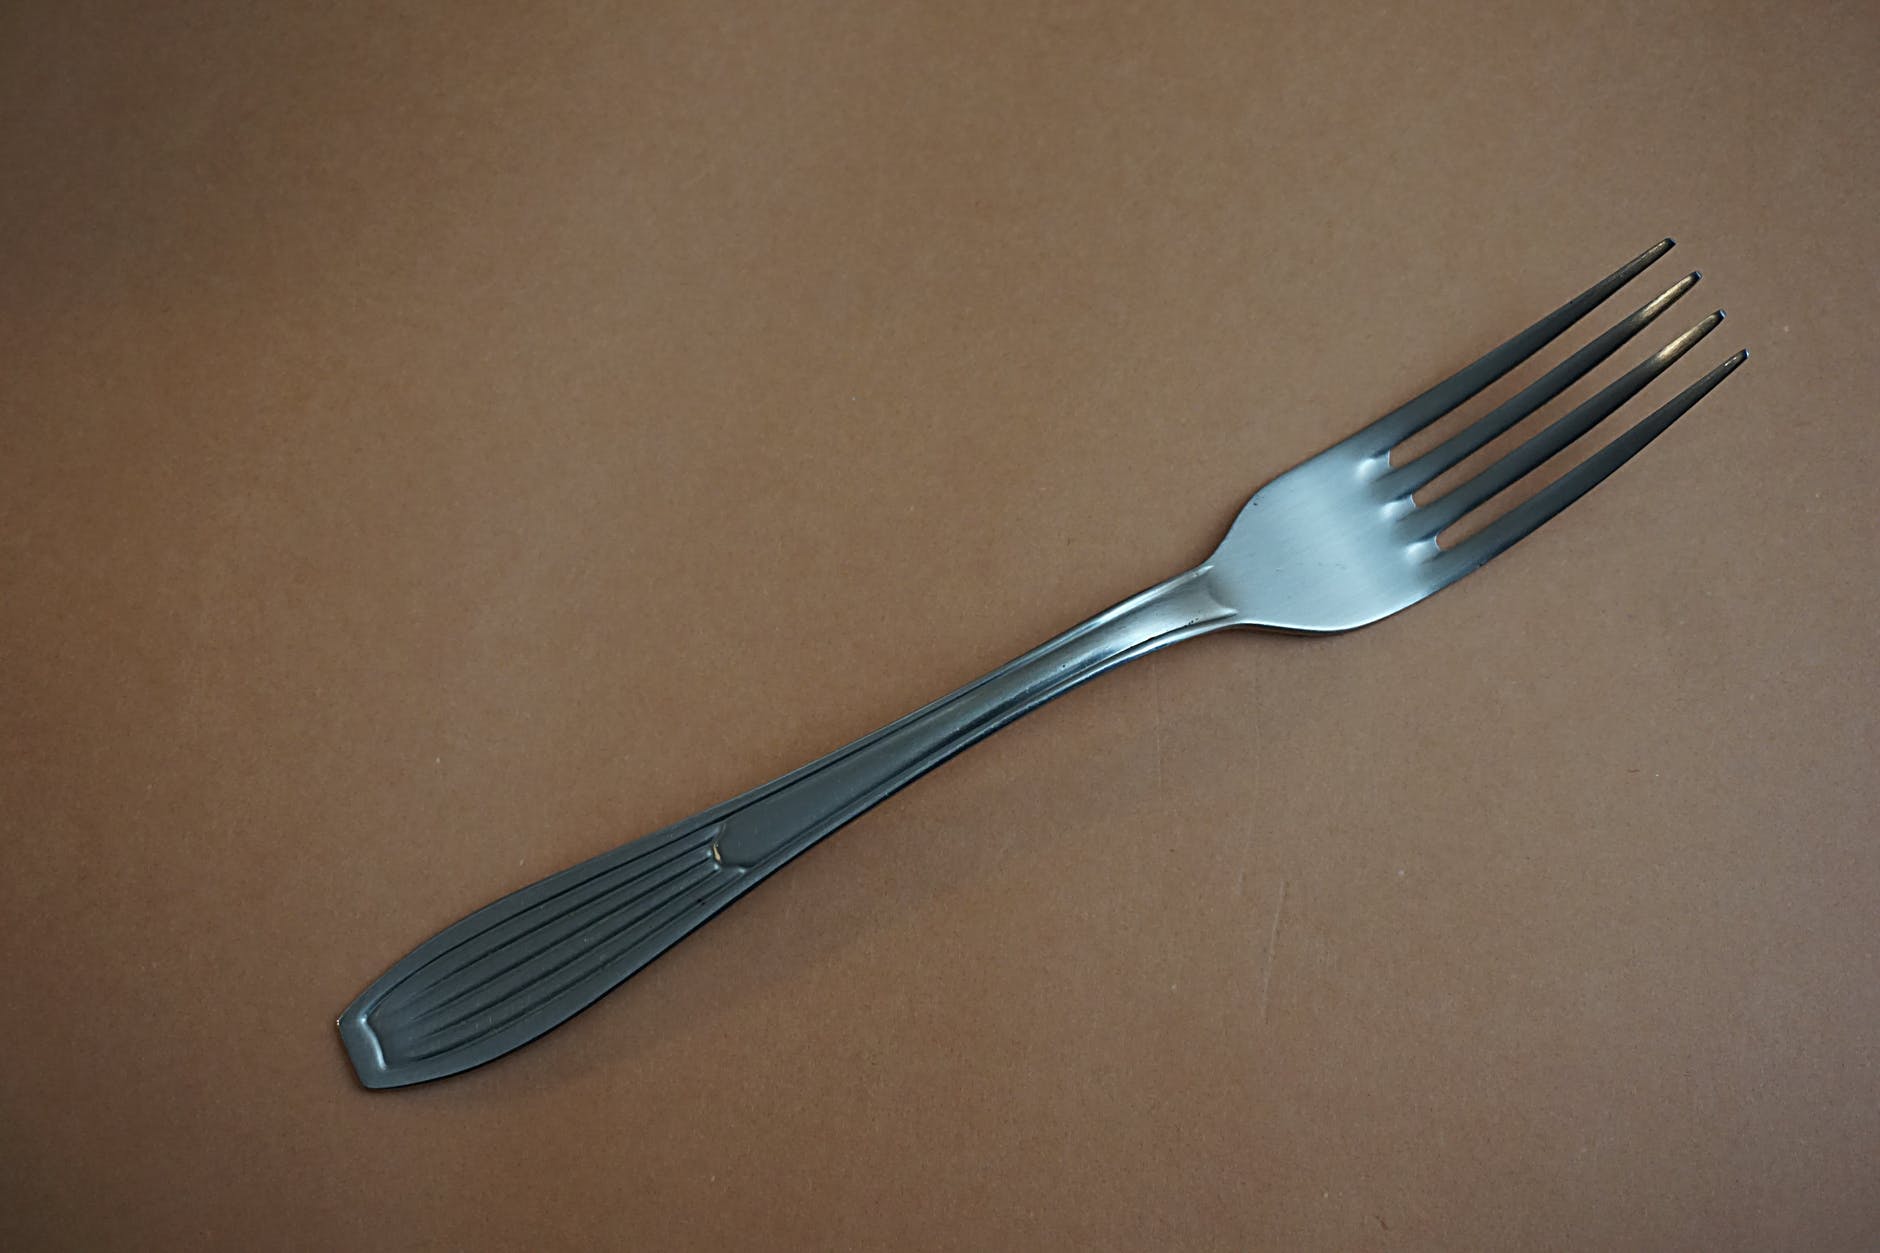 A fork.